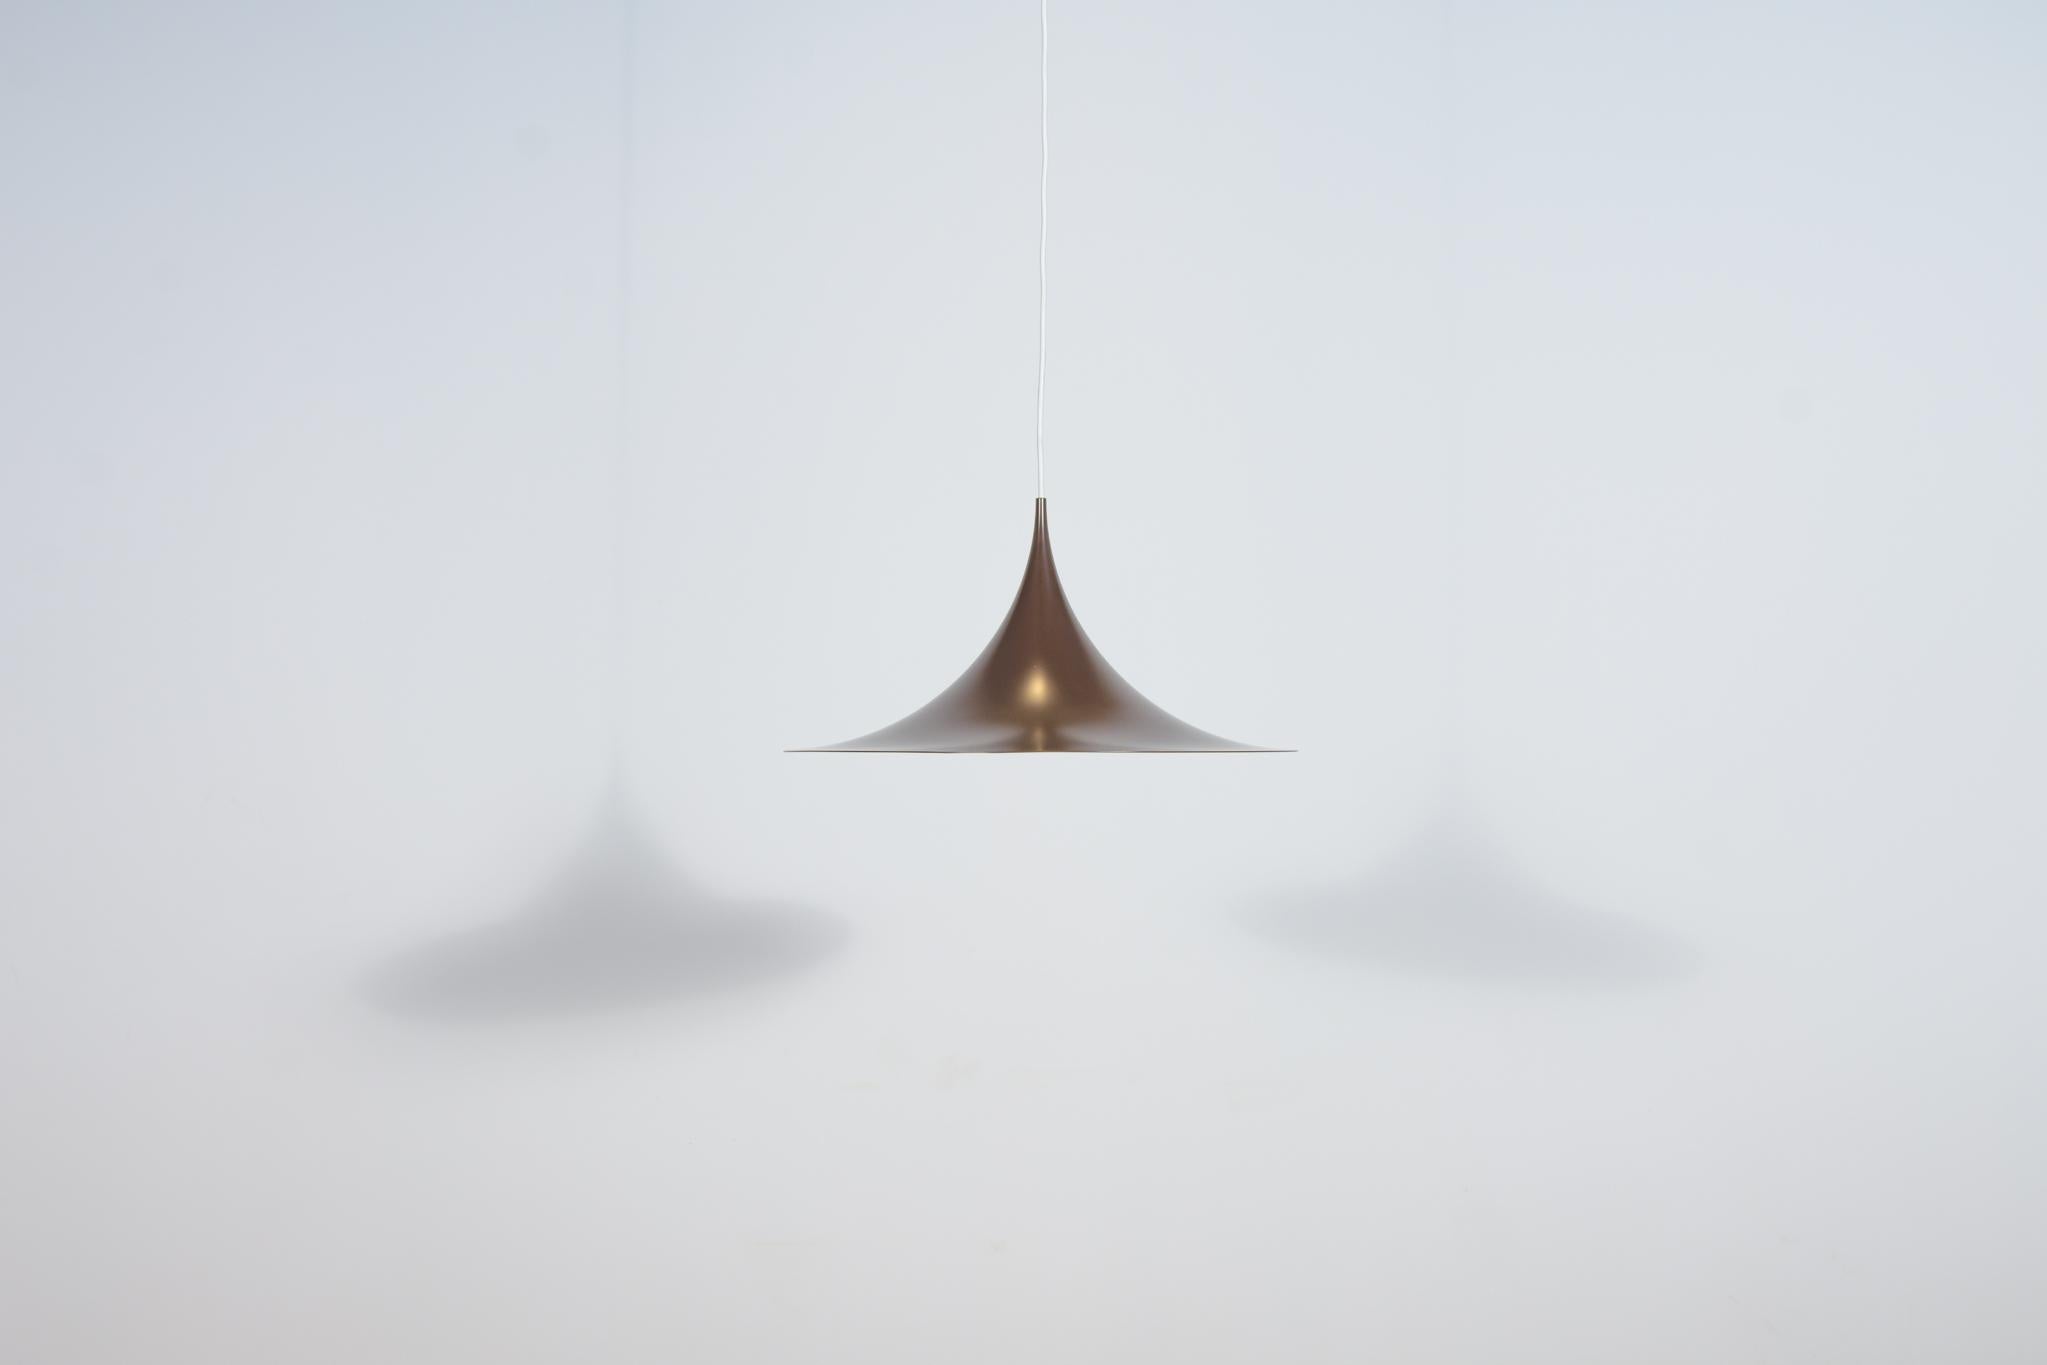 
The pendant lamp Semi designed by Claus Bonderup and Torsten Thorup for Fog & Morup in 1967. The Semi hanging lamp has a beautiful refined and organic shape. The lamp is made of painted aluminium. Semi was produced in many sizes, with diameters